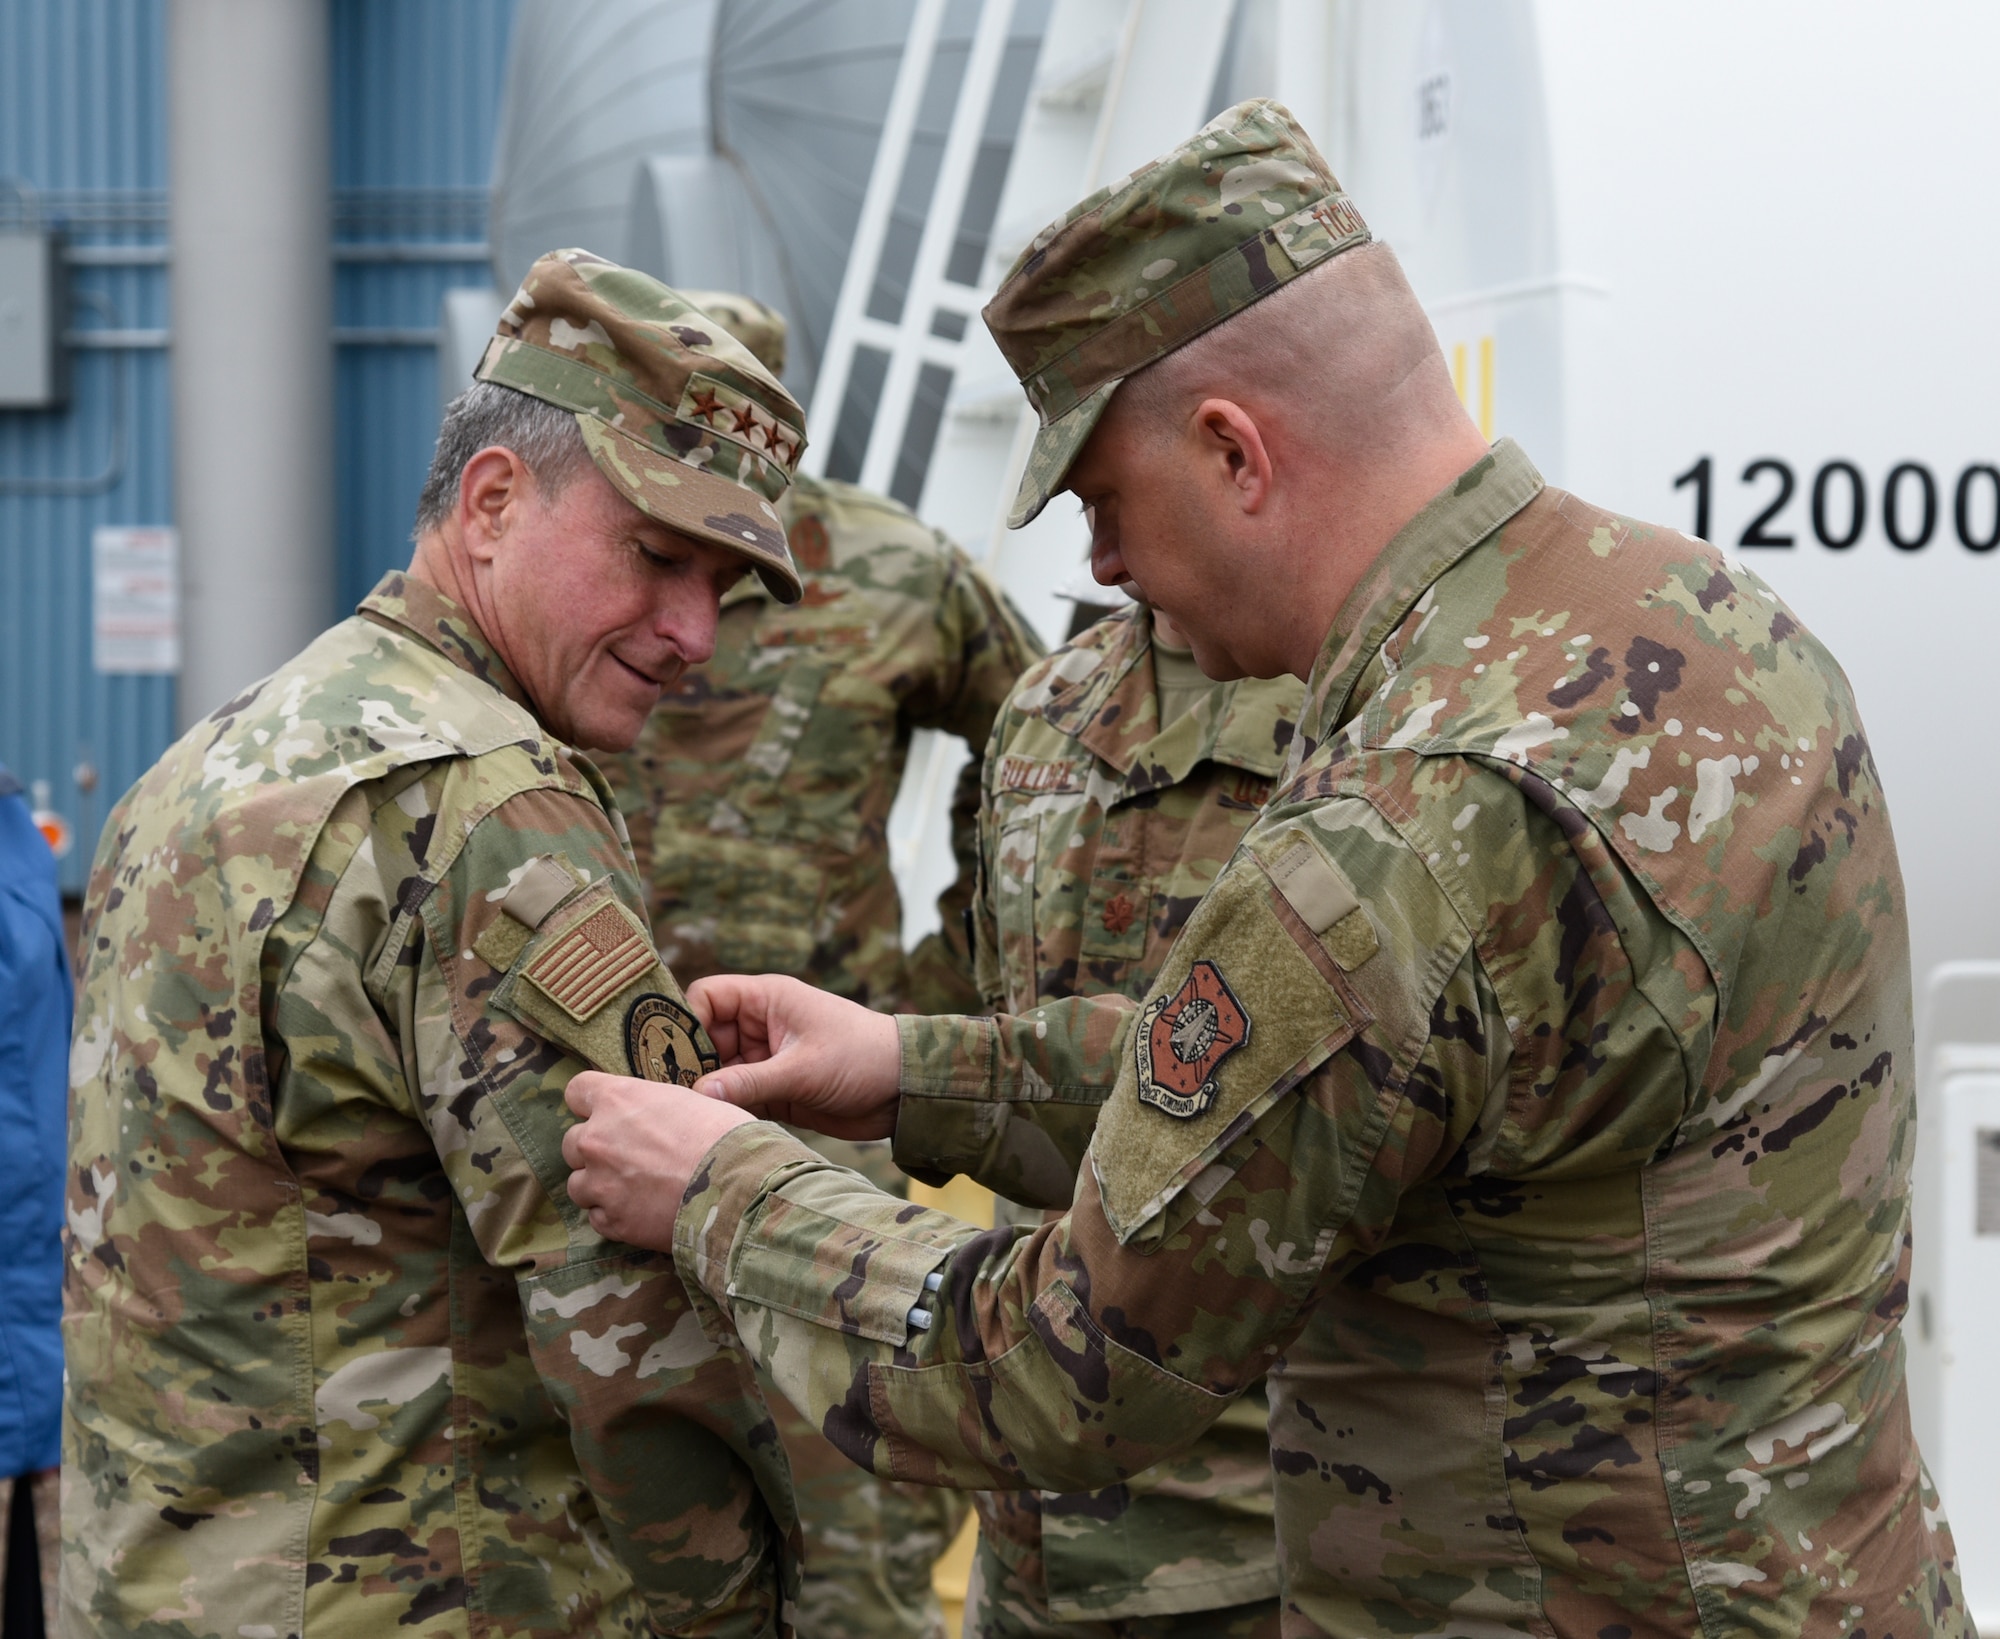 Master Sgt. Timothy Tichawa, 821st Air Base Group member, placed a 12th Space Warning Squadron patch on the Air Force Chief of Staff General David Goldfein’s uniform during a site visit to Thule Air Base, Greenland, July 20, 2019. The squadron is one of three Ballistic Missile Early Warning System radar stations which collectively track satellites, missiles and other objects moving in the airspace above the North Pole. (U.S. Air Force photo by Staff Sgt. Alexandra M. Longfellow)